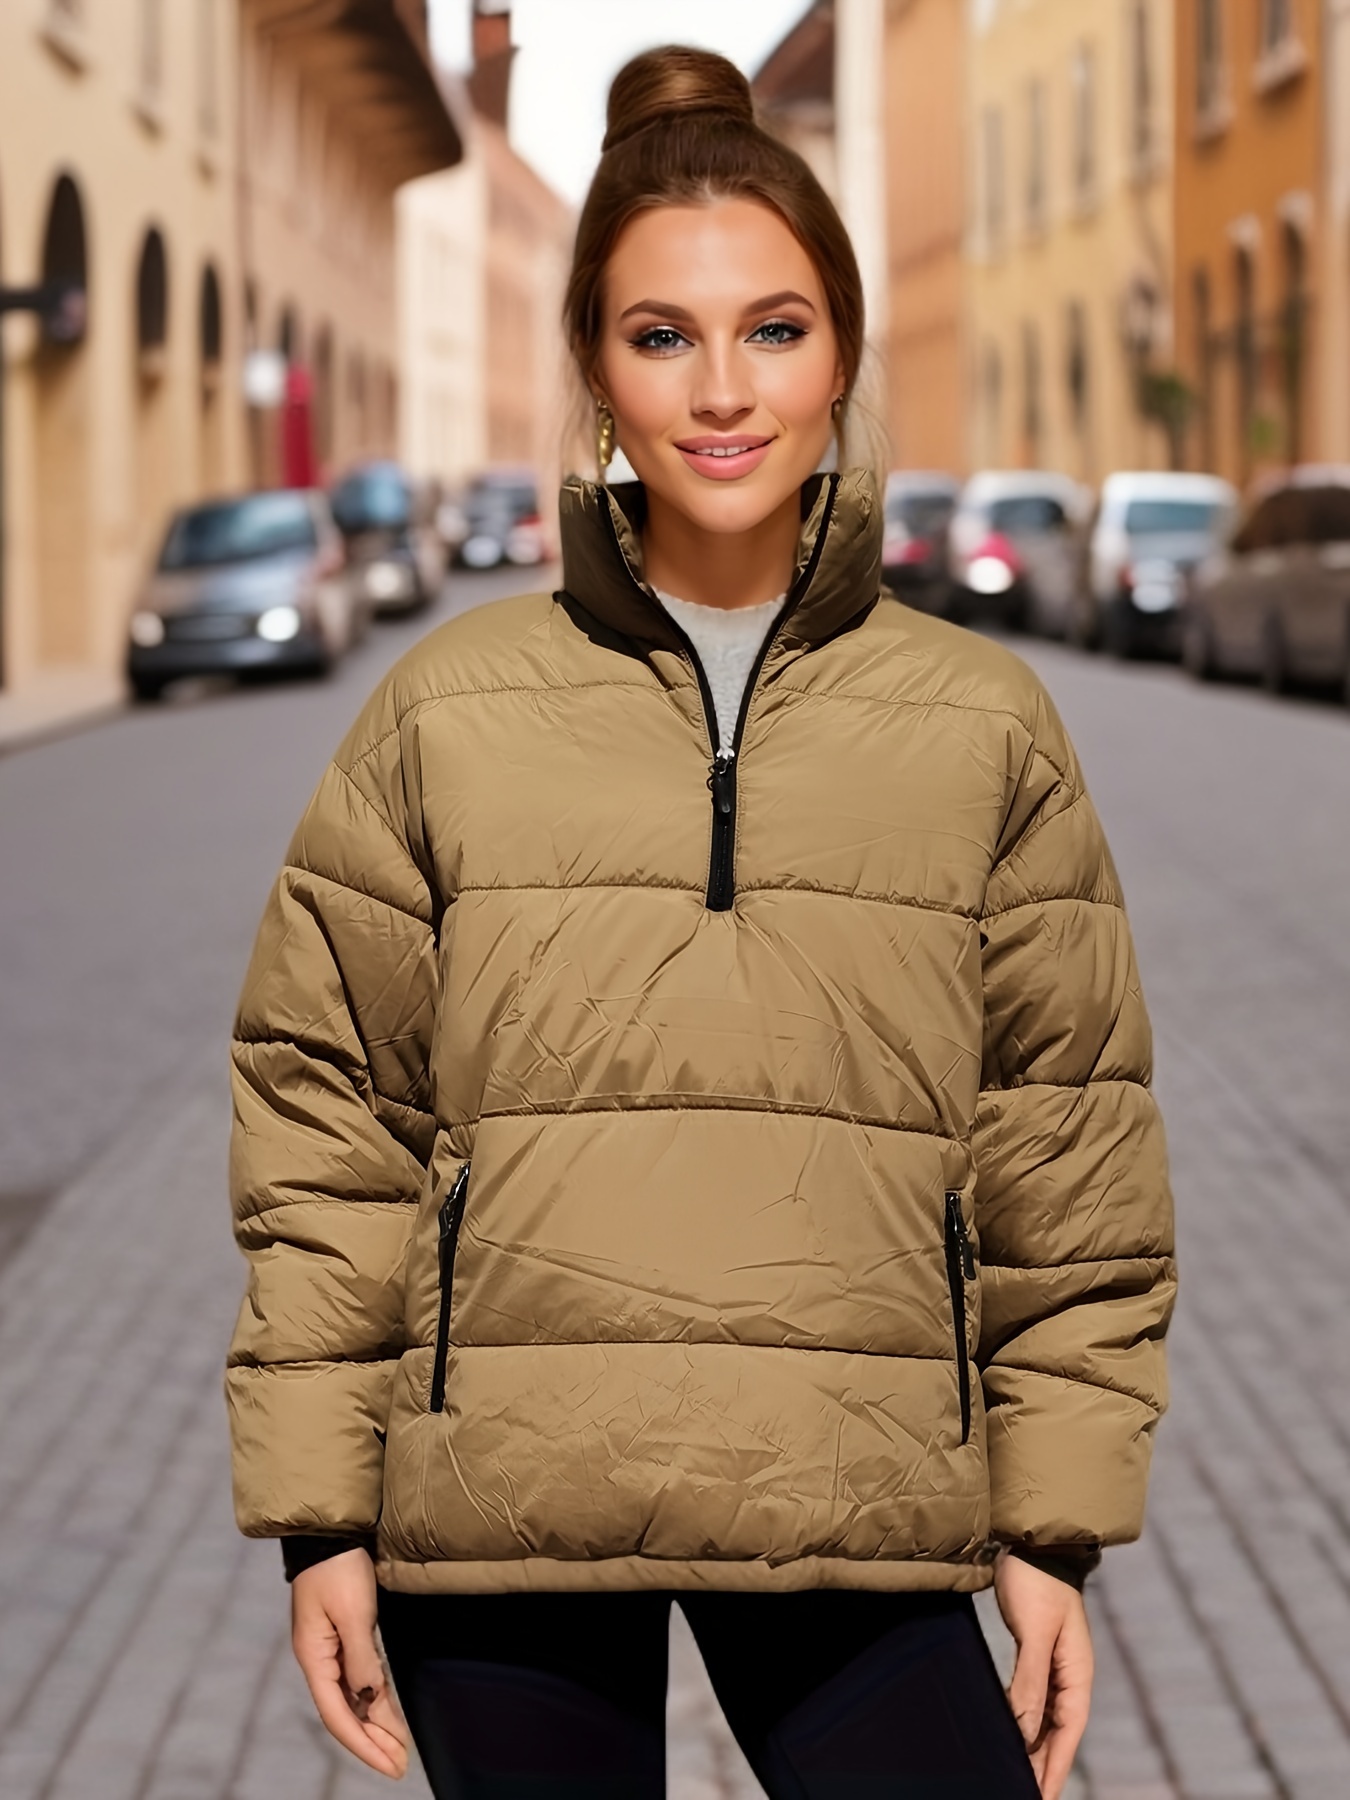 TOWED22 Womens Winter Quilted Jackets Cotton Coat New Long Sleeve Stand  Collar Quilted Casual Women's Warm Jacket (Orange, M) 